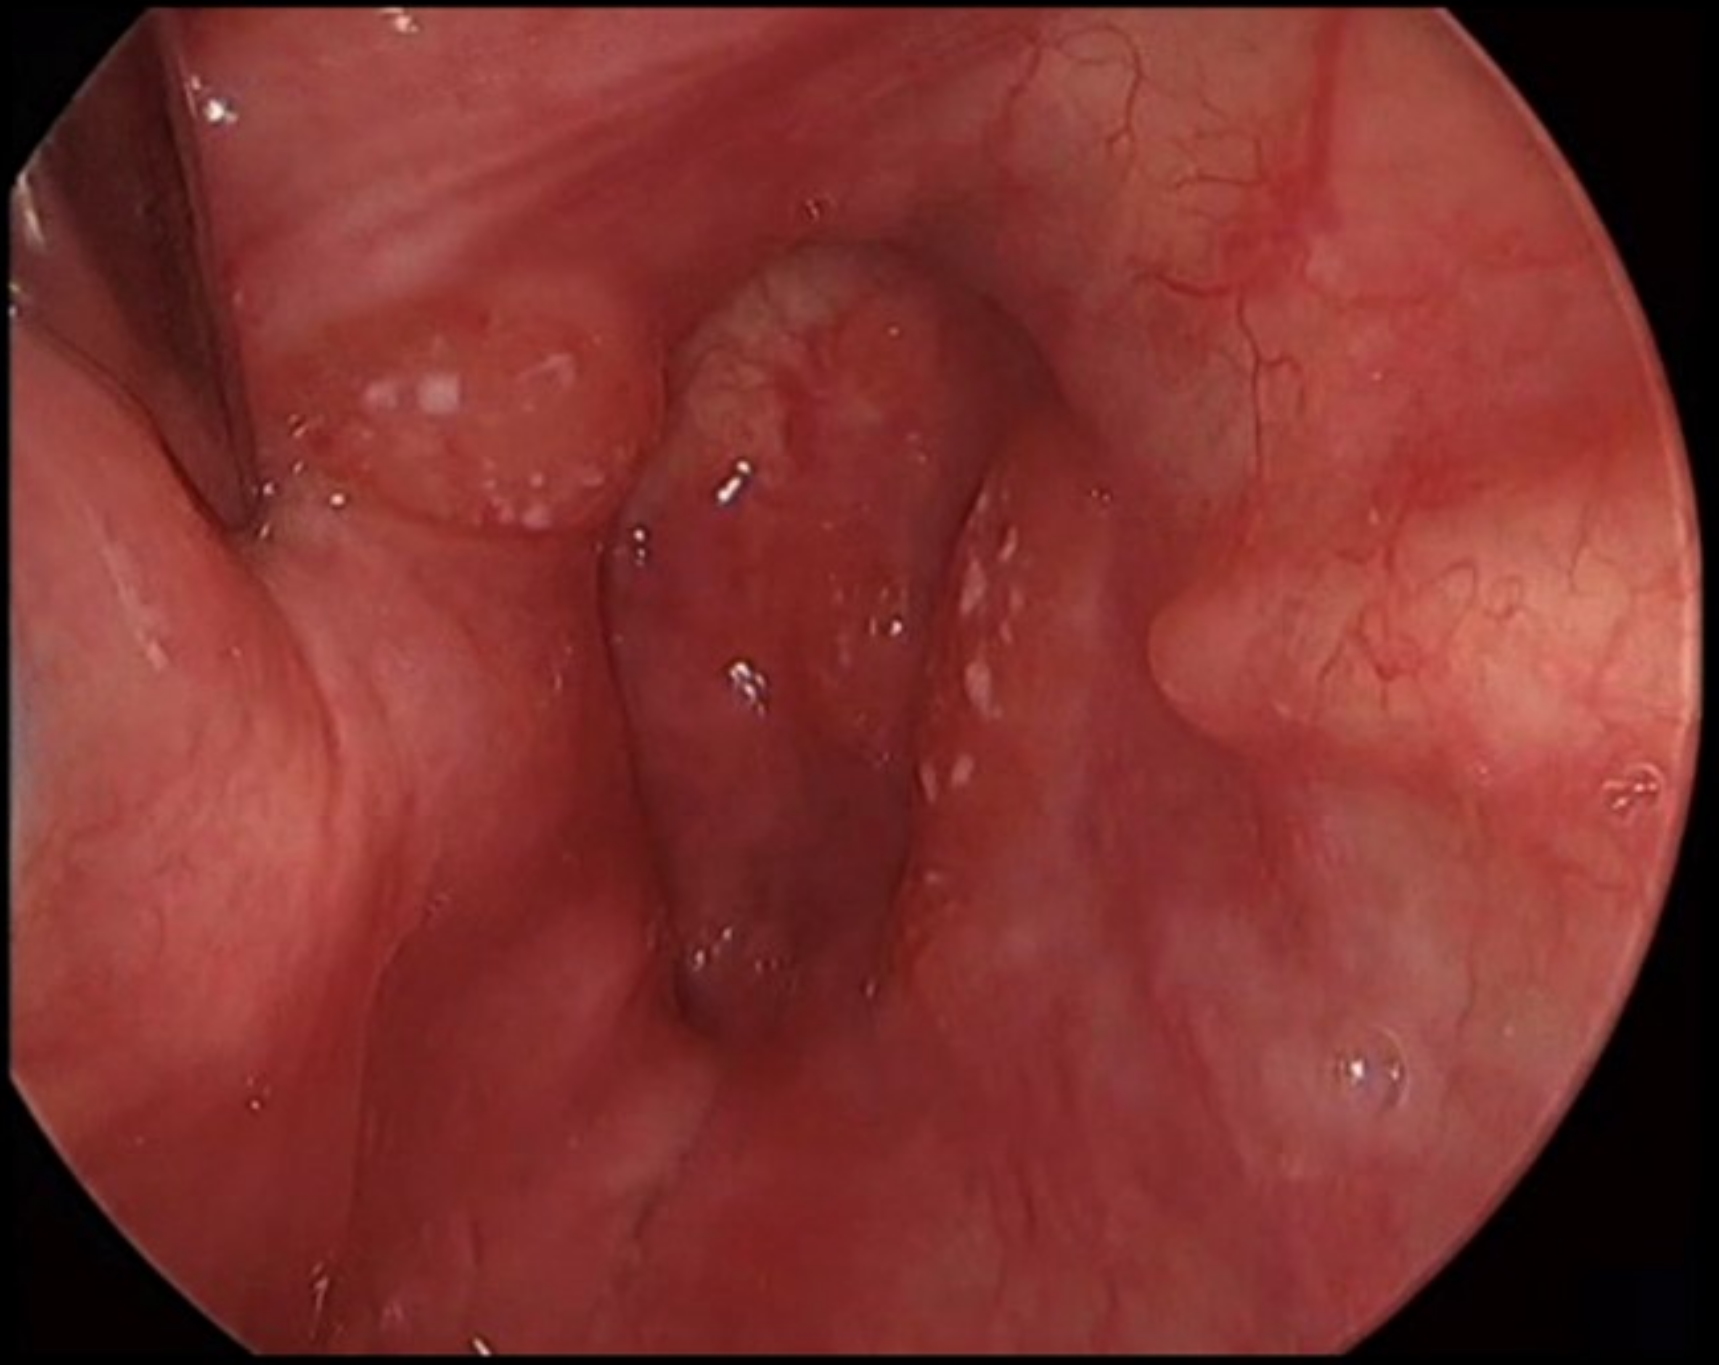 Polypoid ulcerated hypopharyngeal lesion